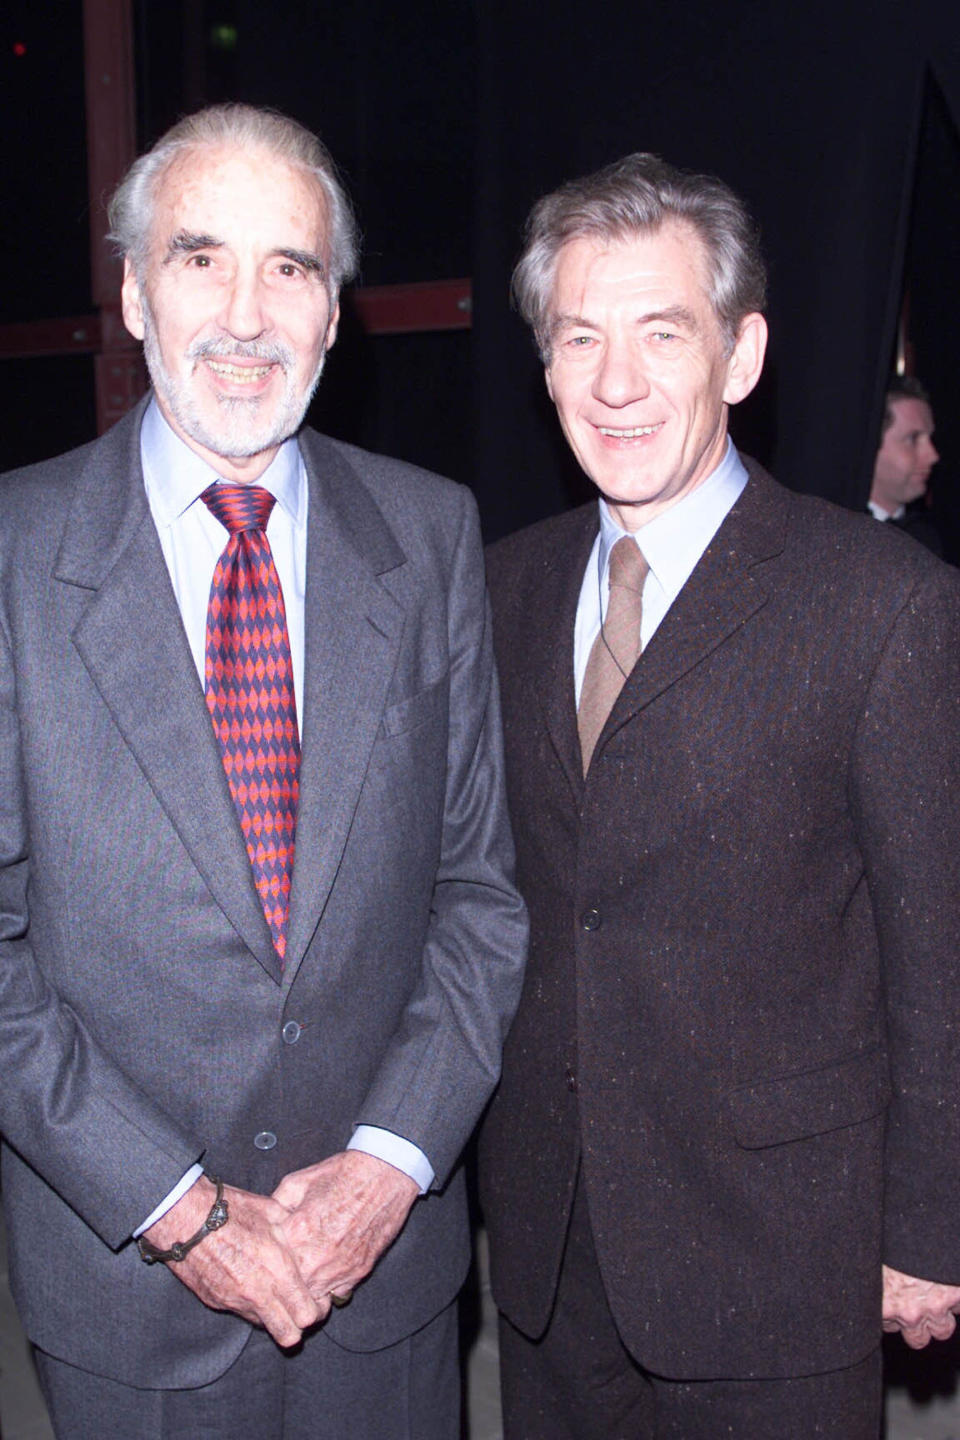 LONDON - DECEMBER 11: British actor Christopher Lee and Ian McKellen attend the premiere party for the film "Lord of the Rings: The Fellowship of the Ring" at Tobacco Dock on December 11, 2001 in London. (Photo by Dave Hogan/Getty Images)